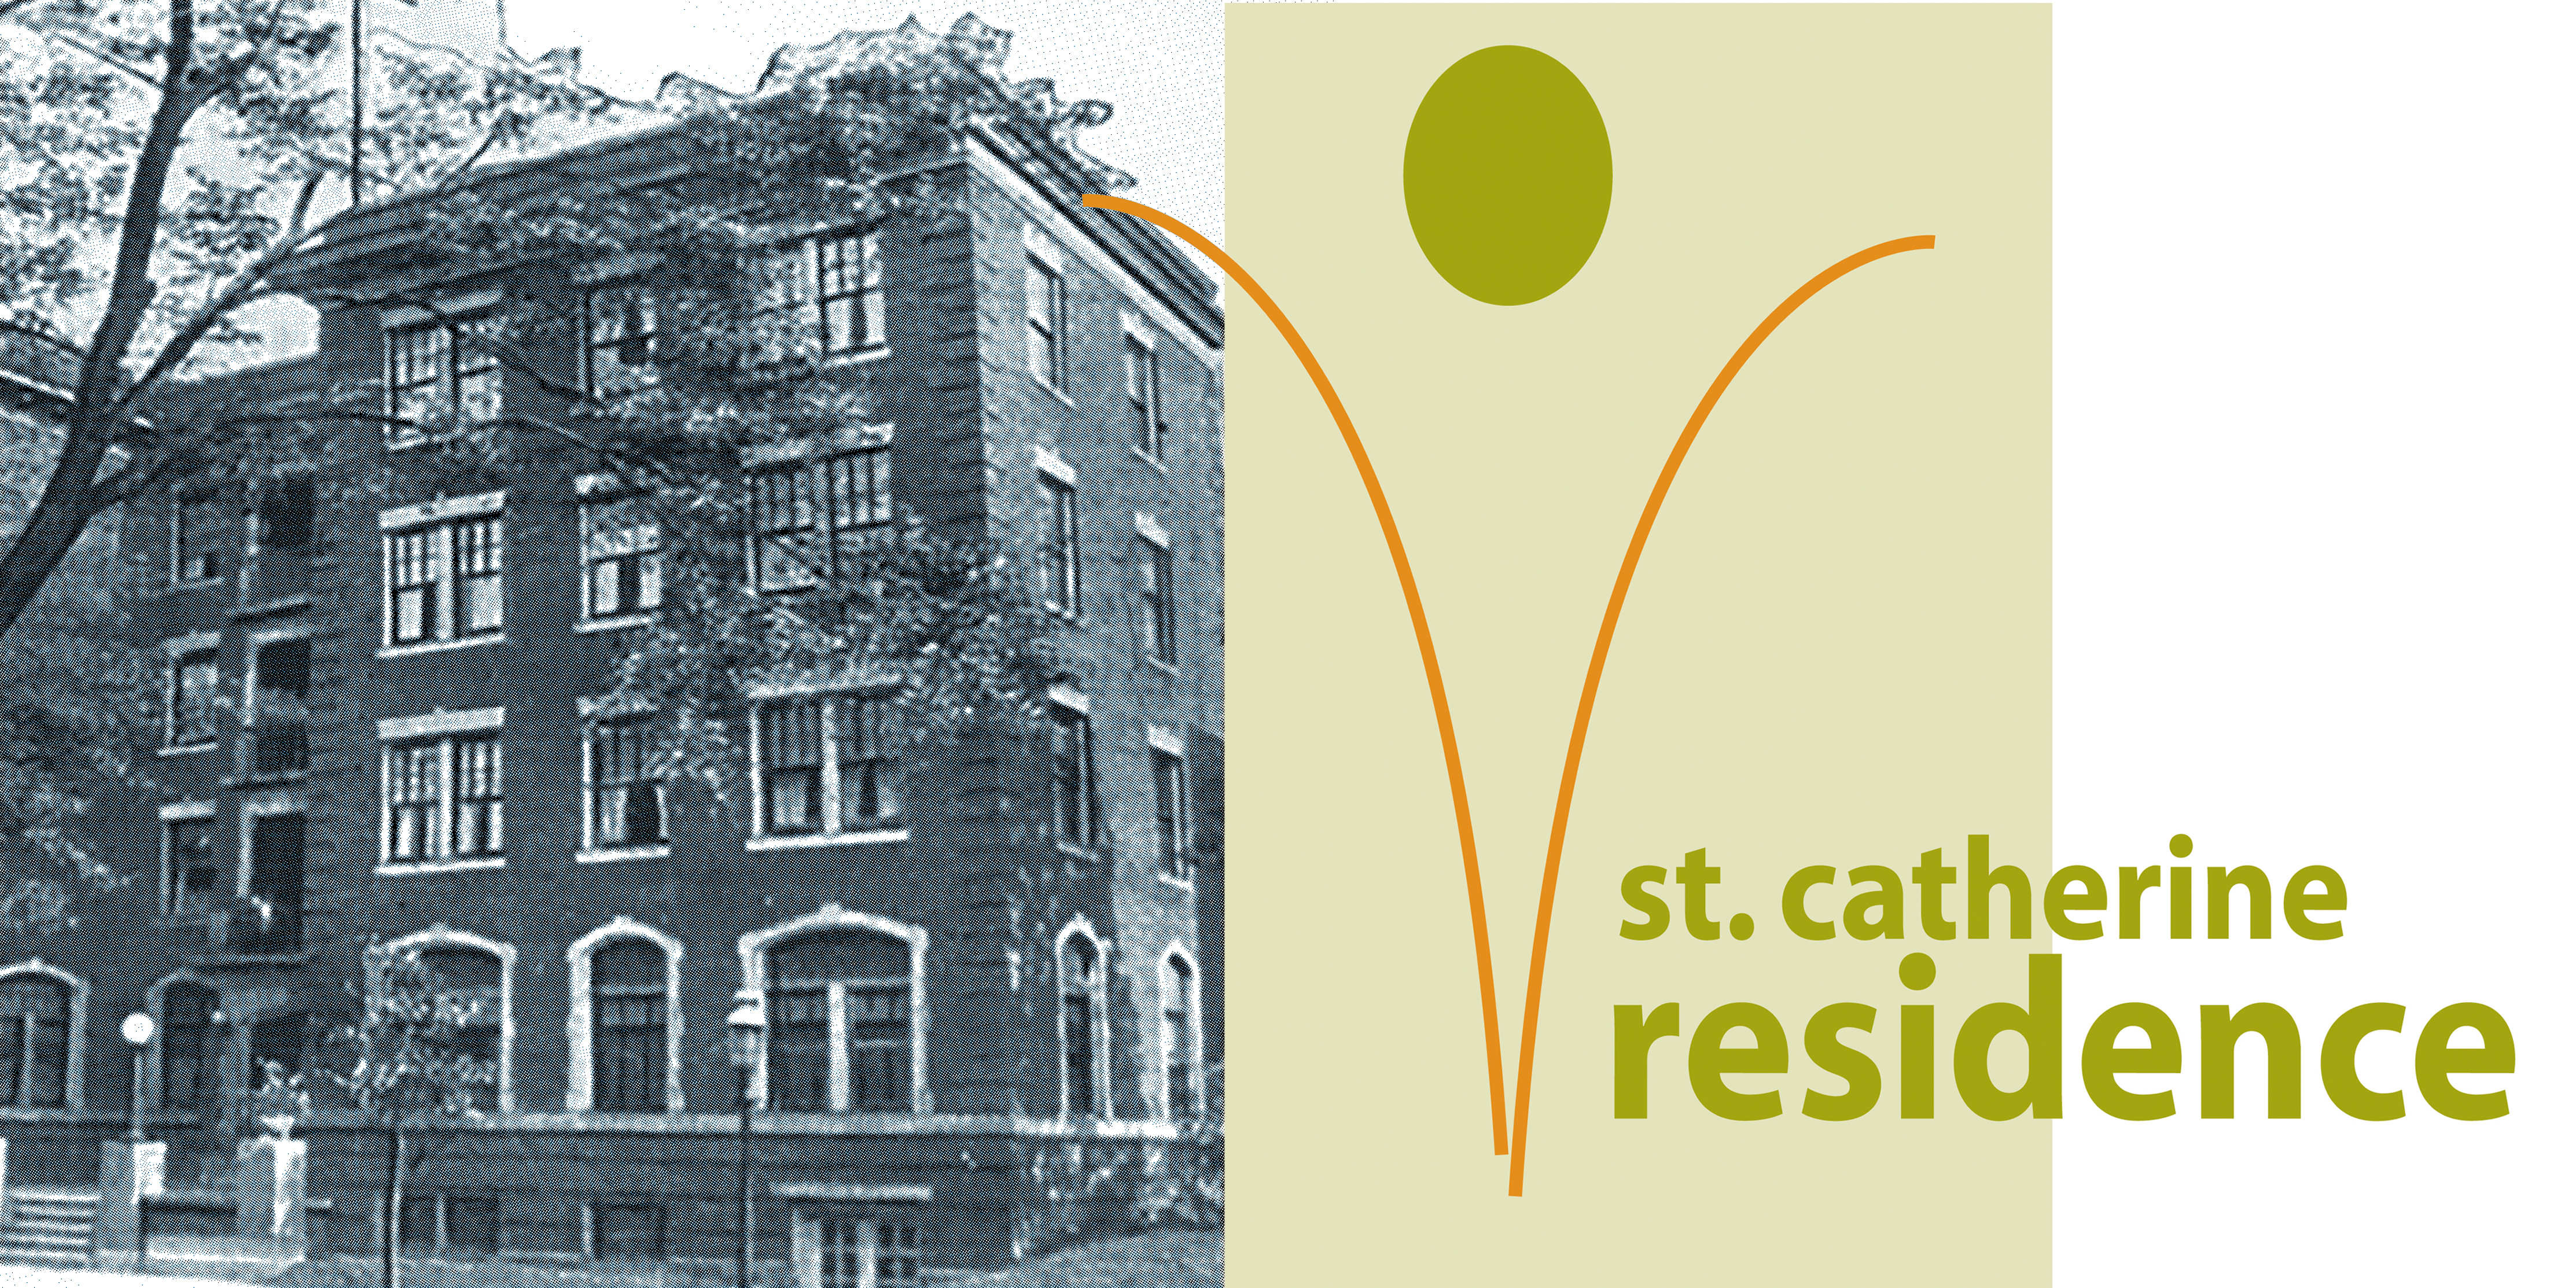 old photo of St Catherine residence and logo of the property